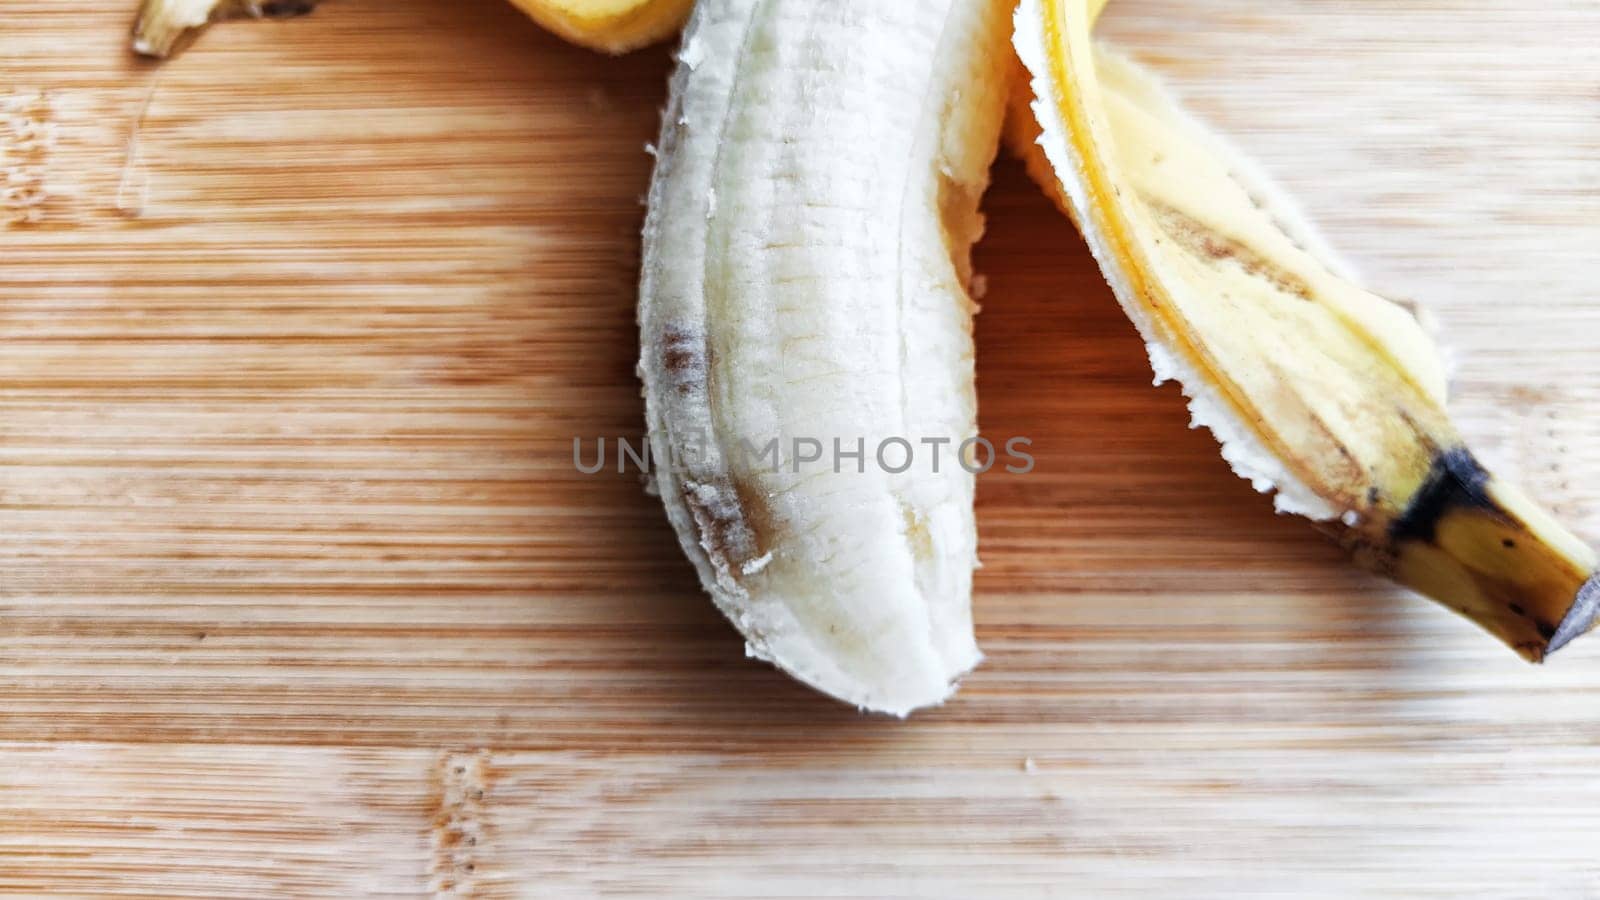 Banana with open peel on wooden board and white background. Ripe banana with peel, Close up. Delicious sweet fruit dessert